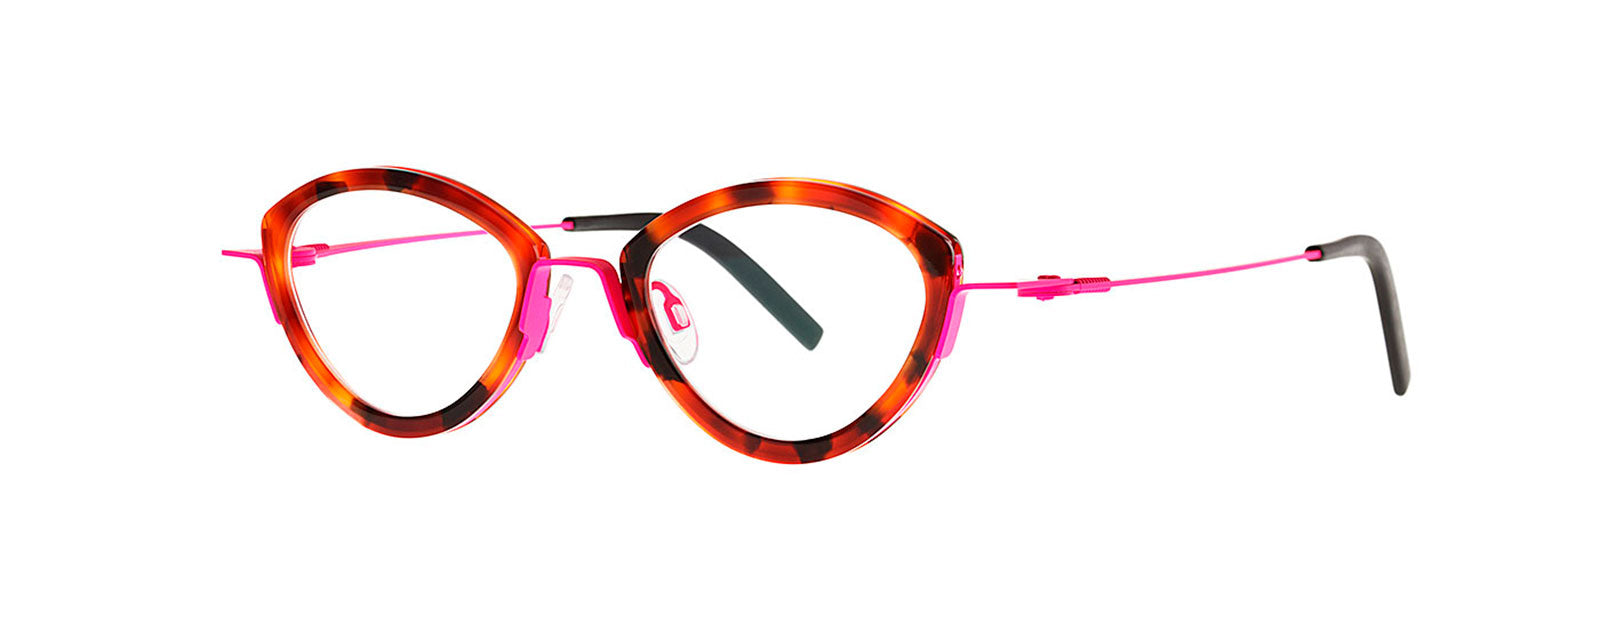 Sprouts 19 Ecail + Fluo Pink by Theo Eyewear